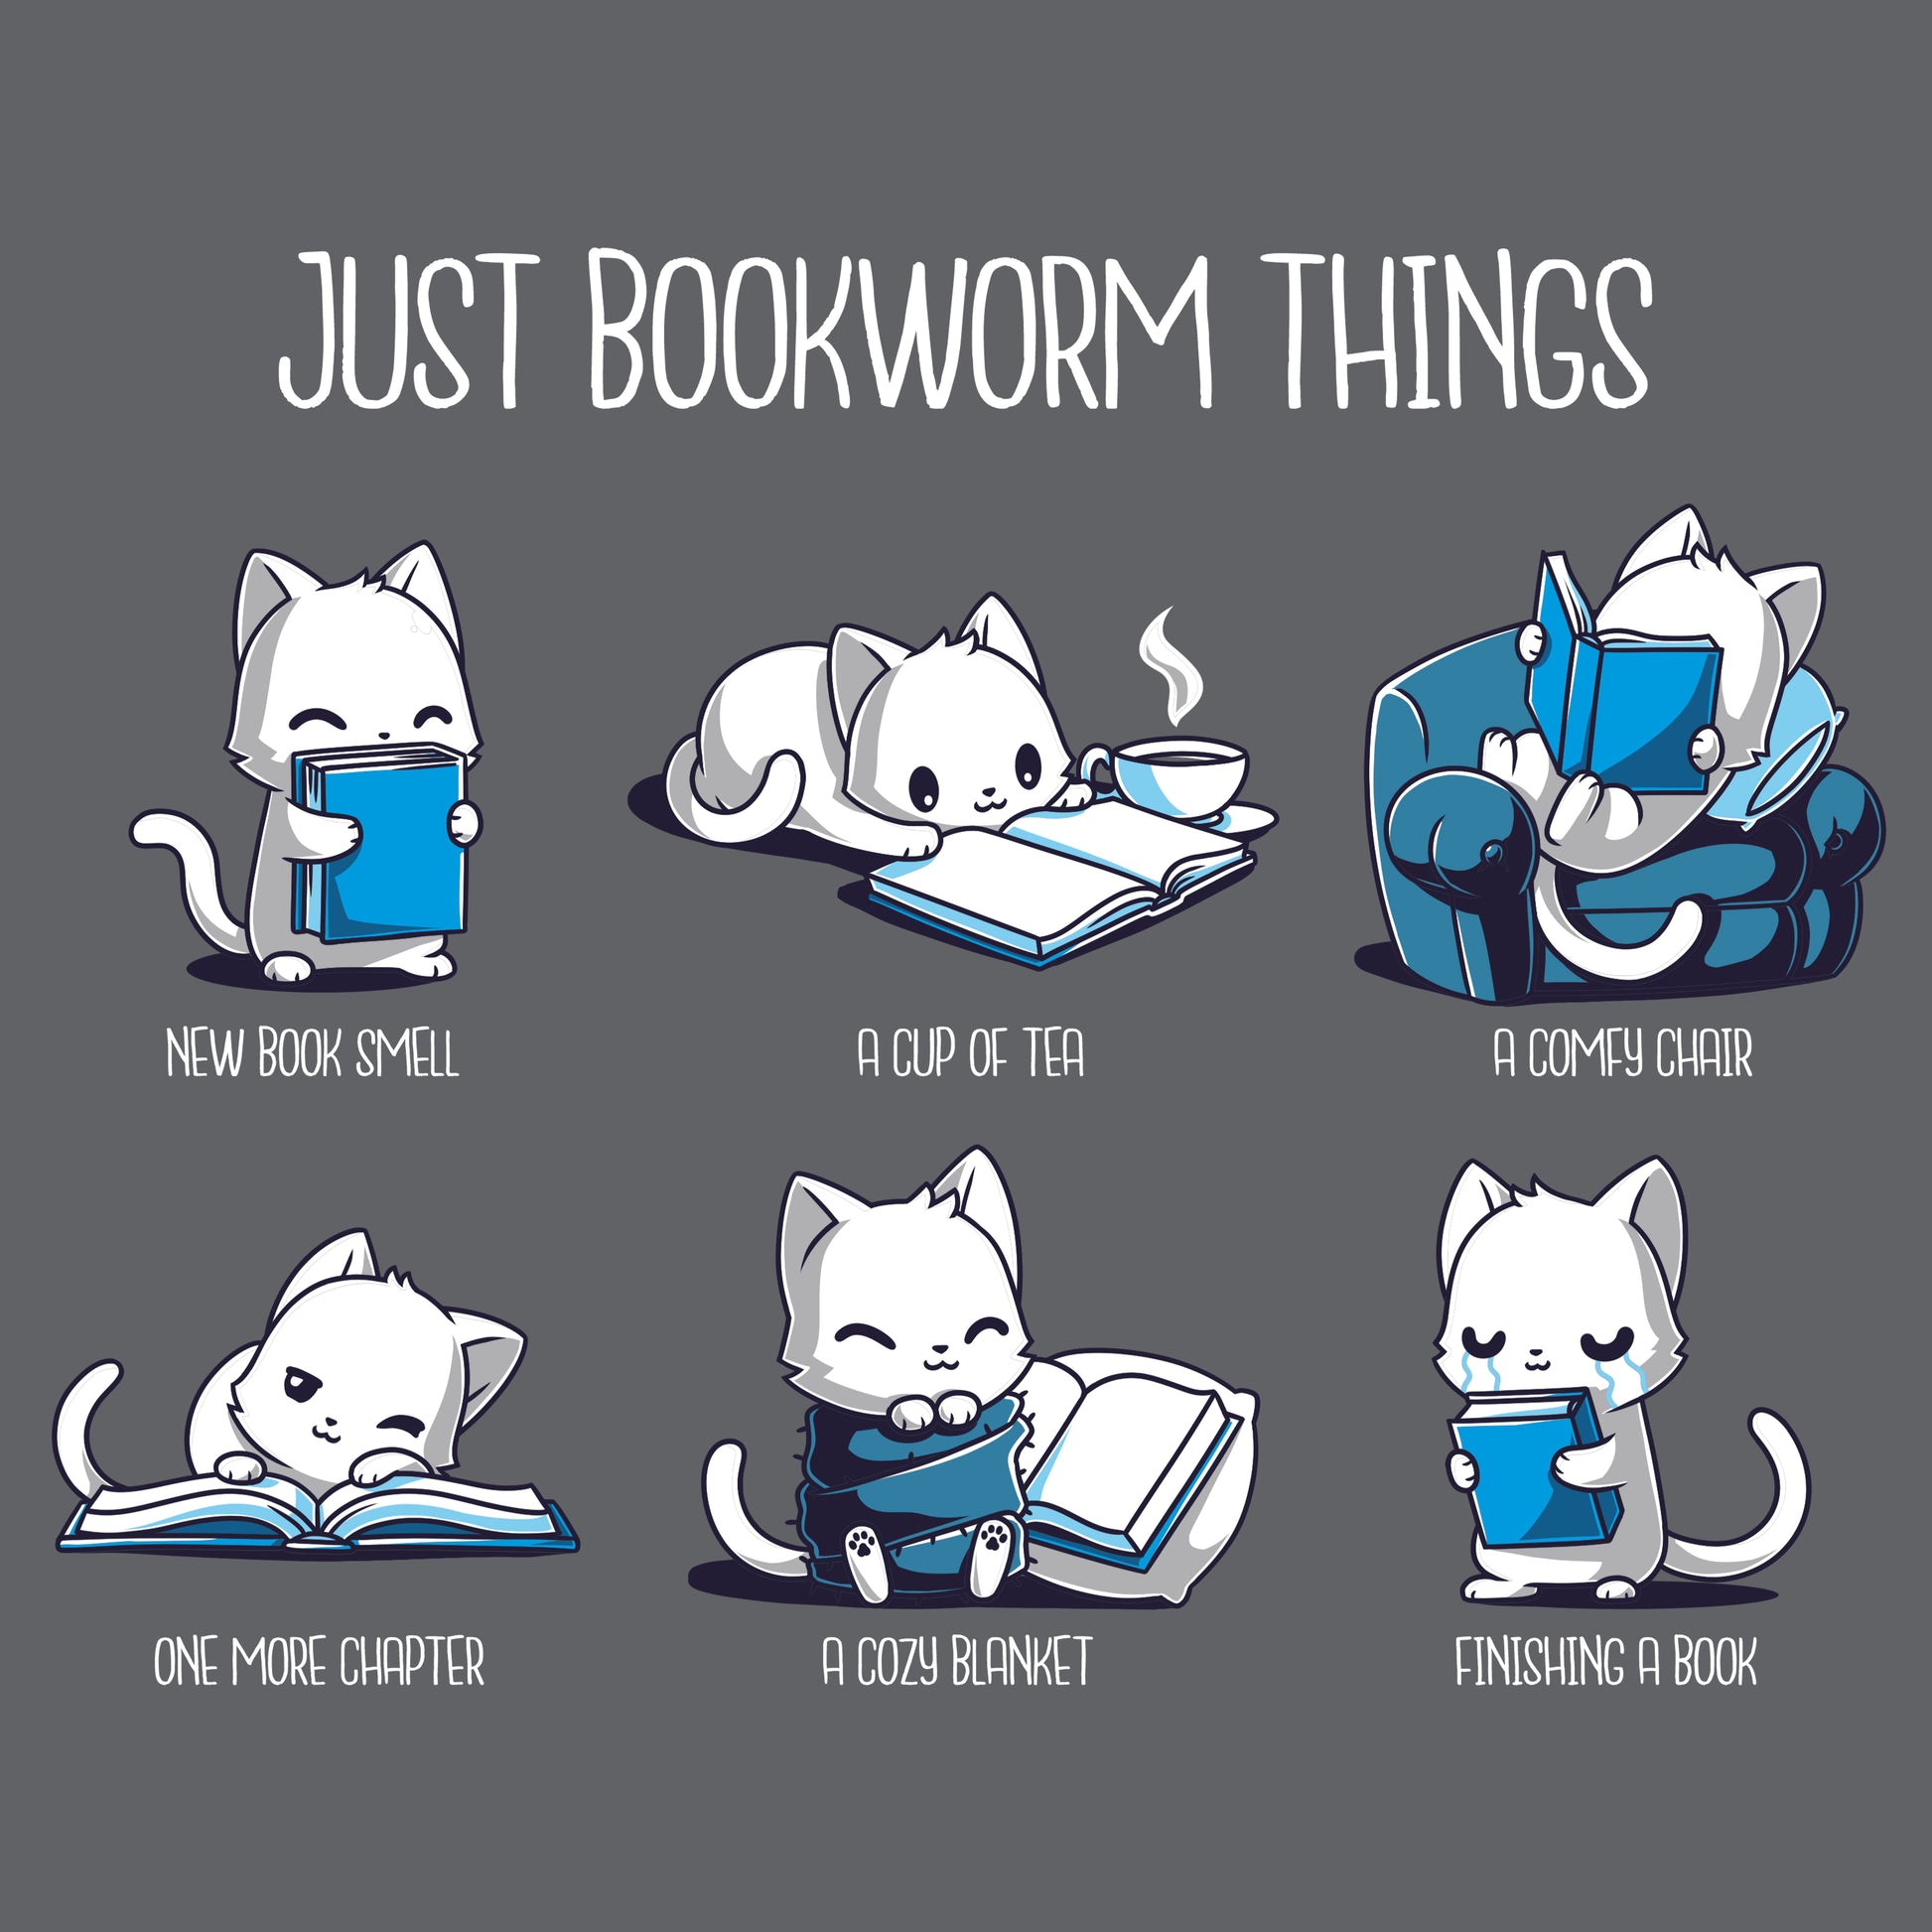 Illustration of six cat characters enjoying different aspects of reading, titled "Just Bookworm Things," on a super soft ringspun cotton charcoal gray tee by monsterdigital. The cats are depicted smelling a new book, drinking tea, sitting in a chair, reading another chapter, using a blanket, and finishing a book.